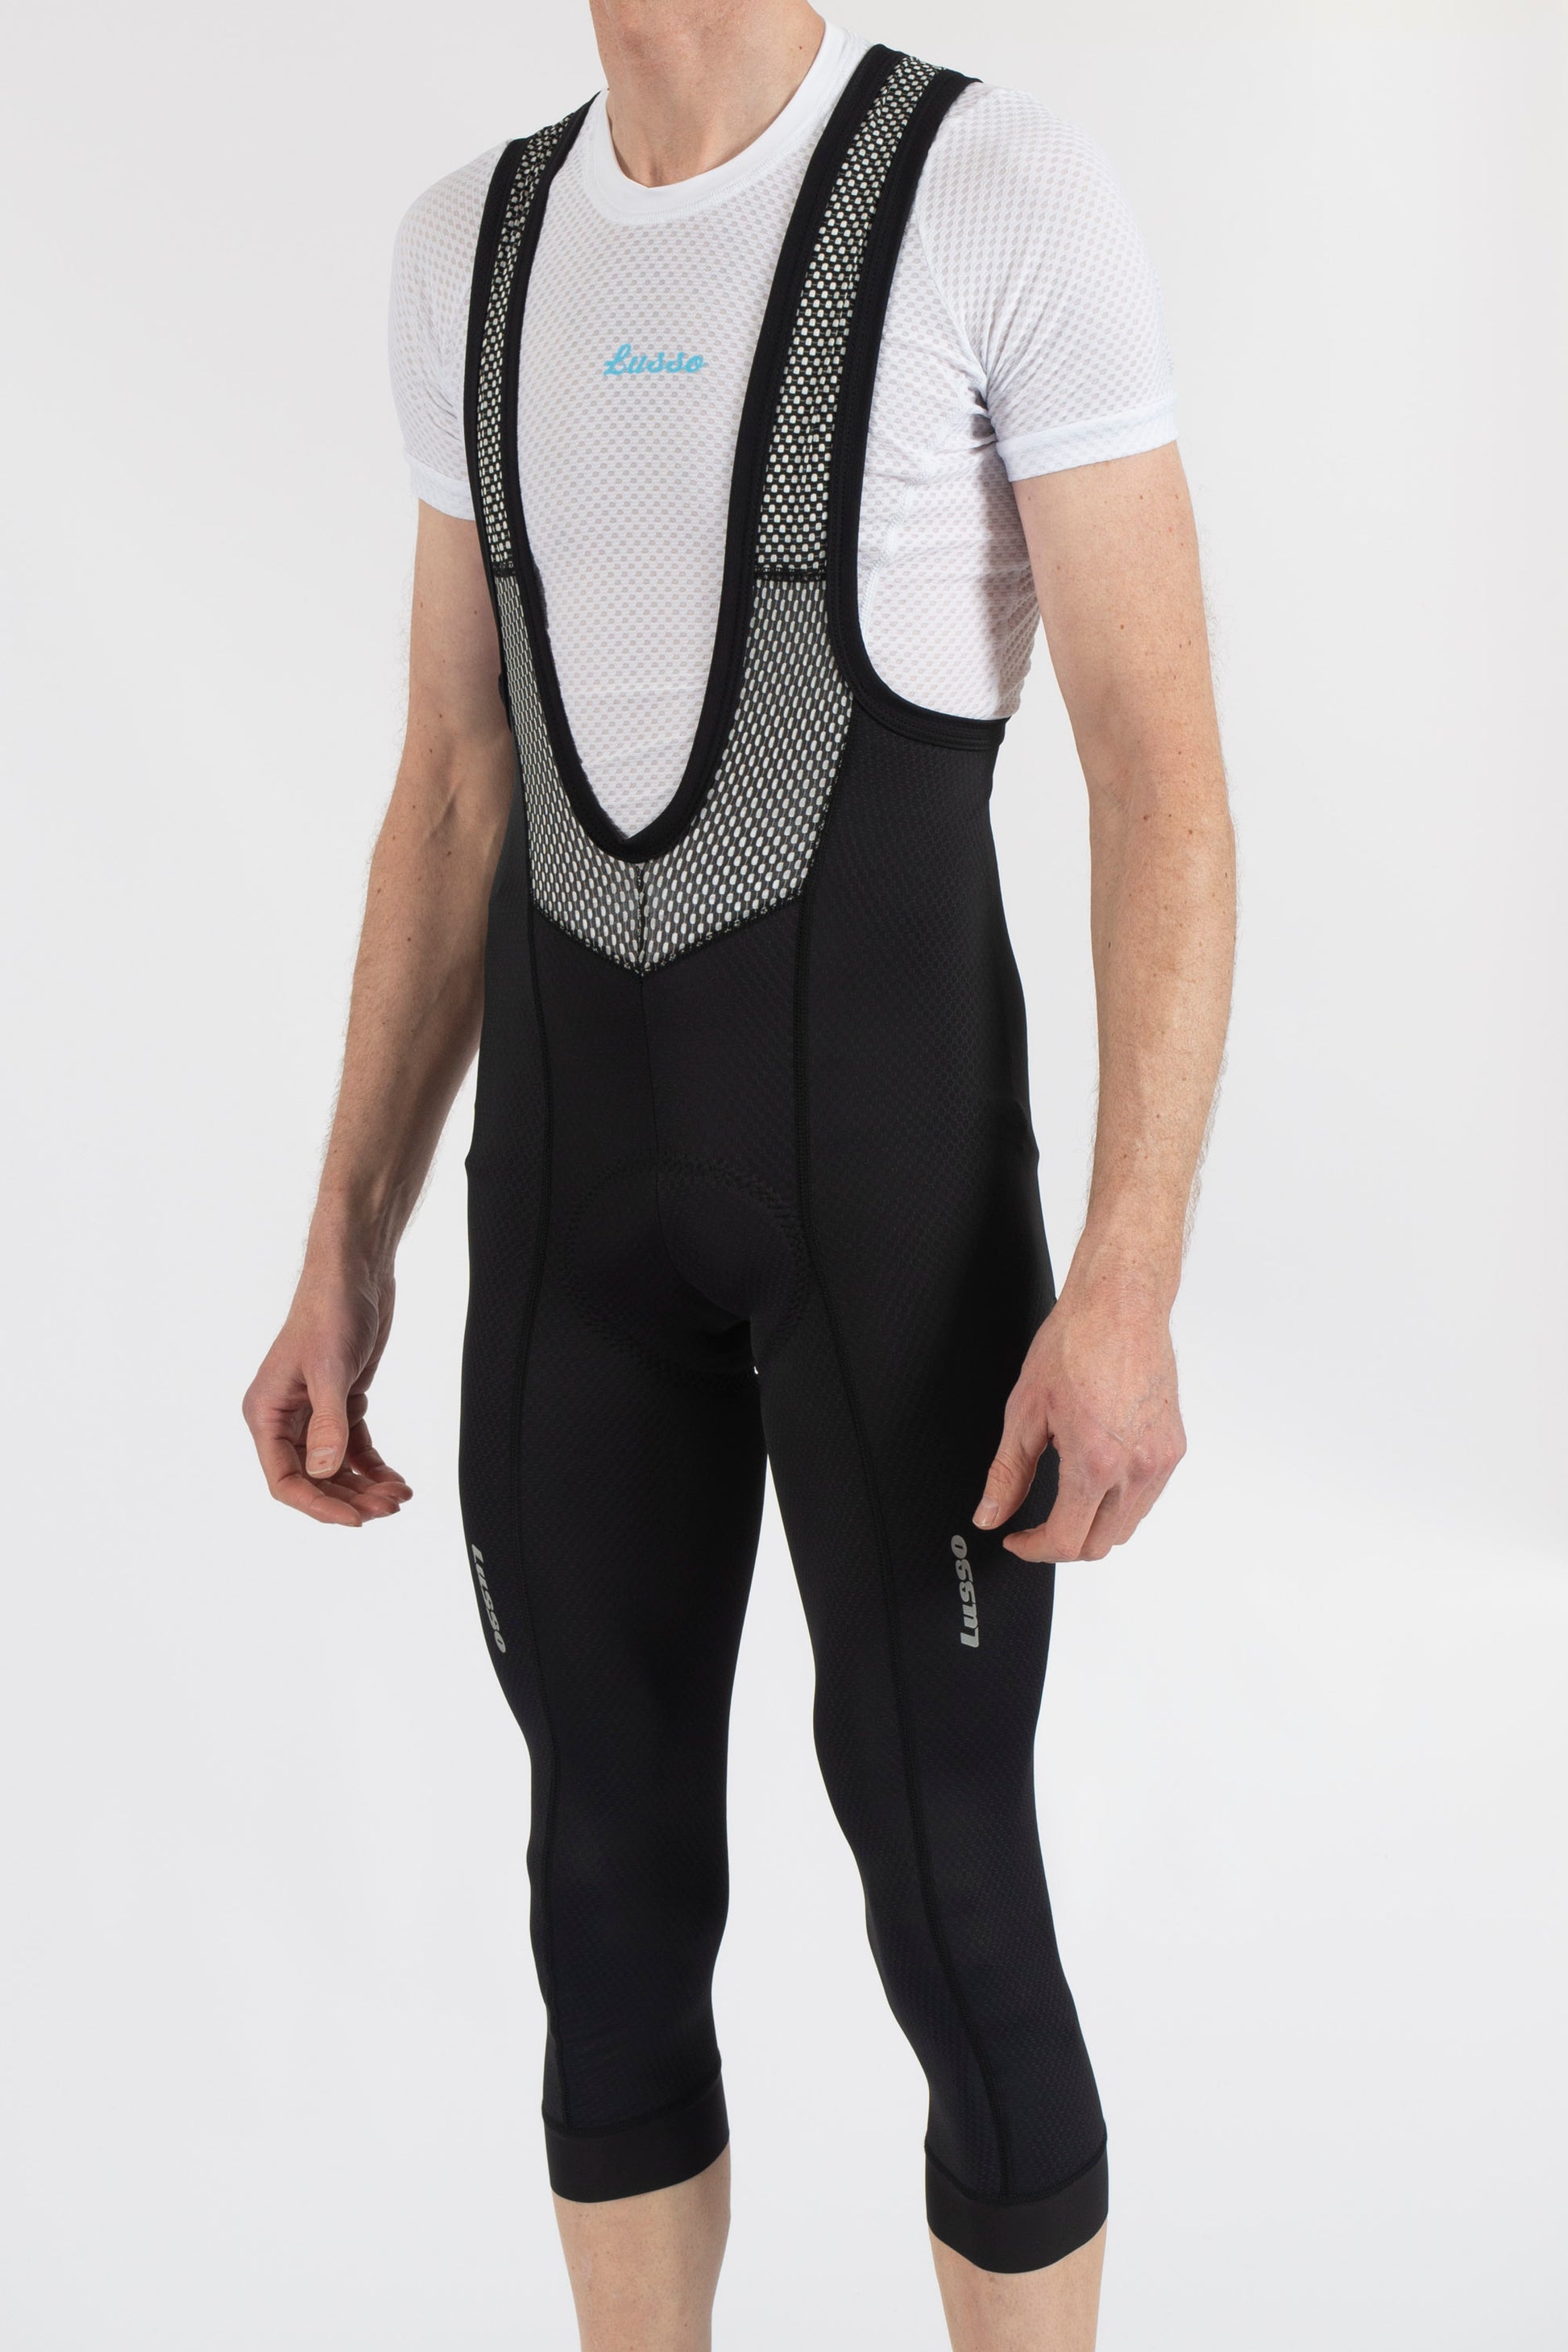 Cooltech 3/4 Bibtights - Lusso Cycle Wear